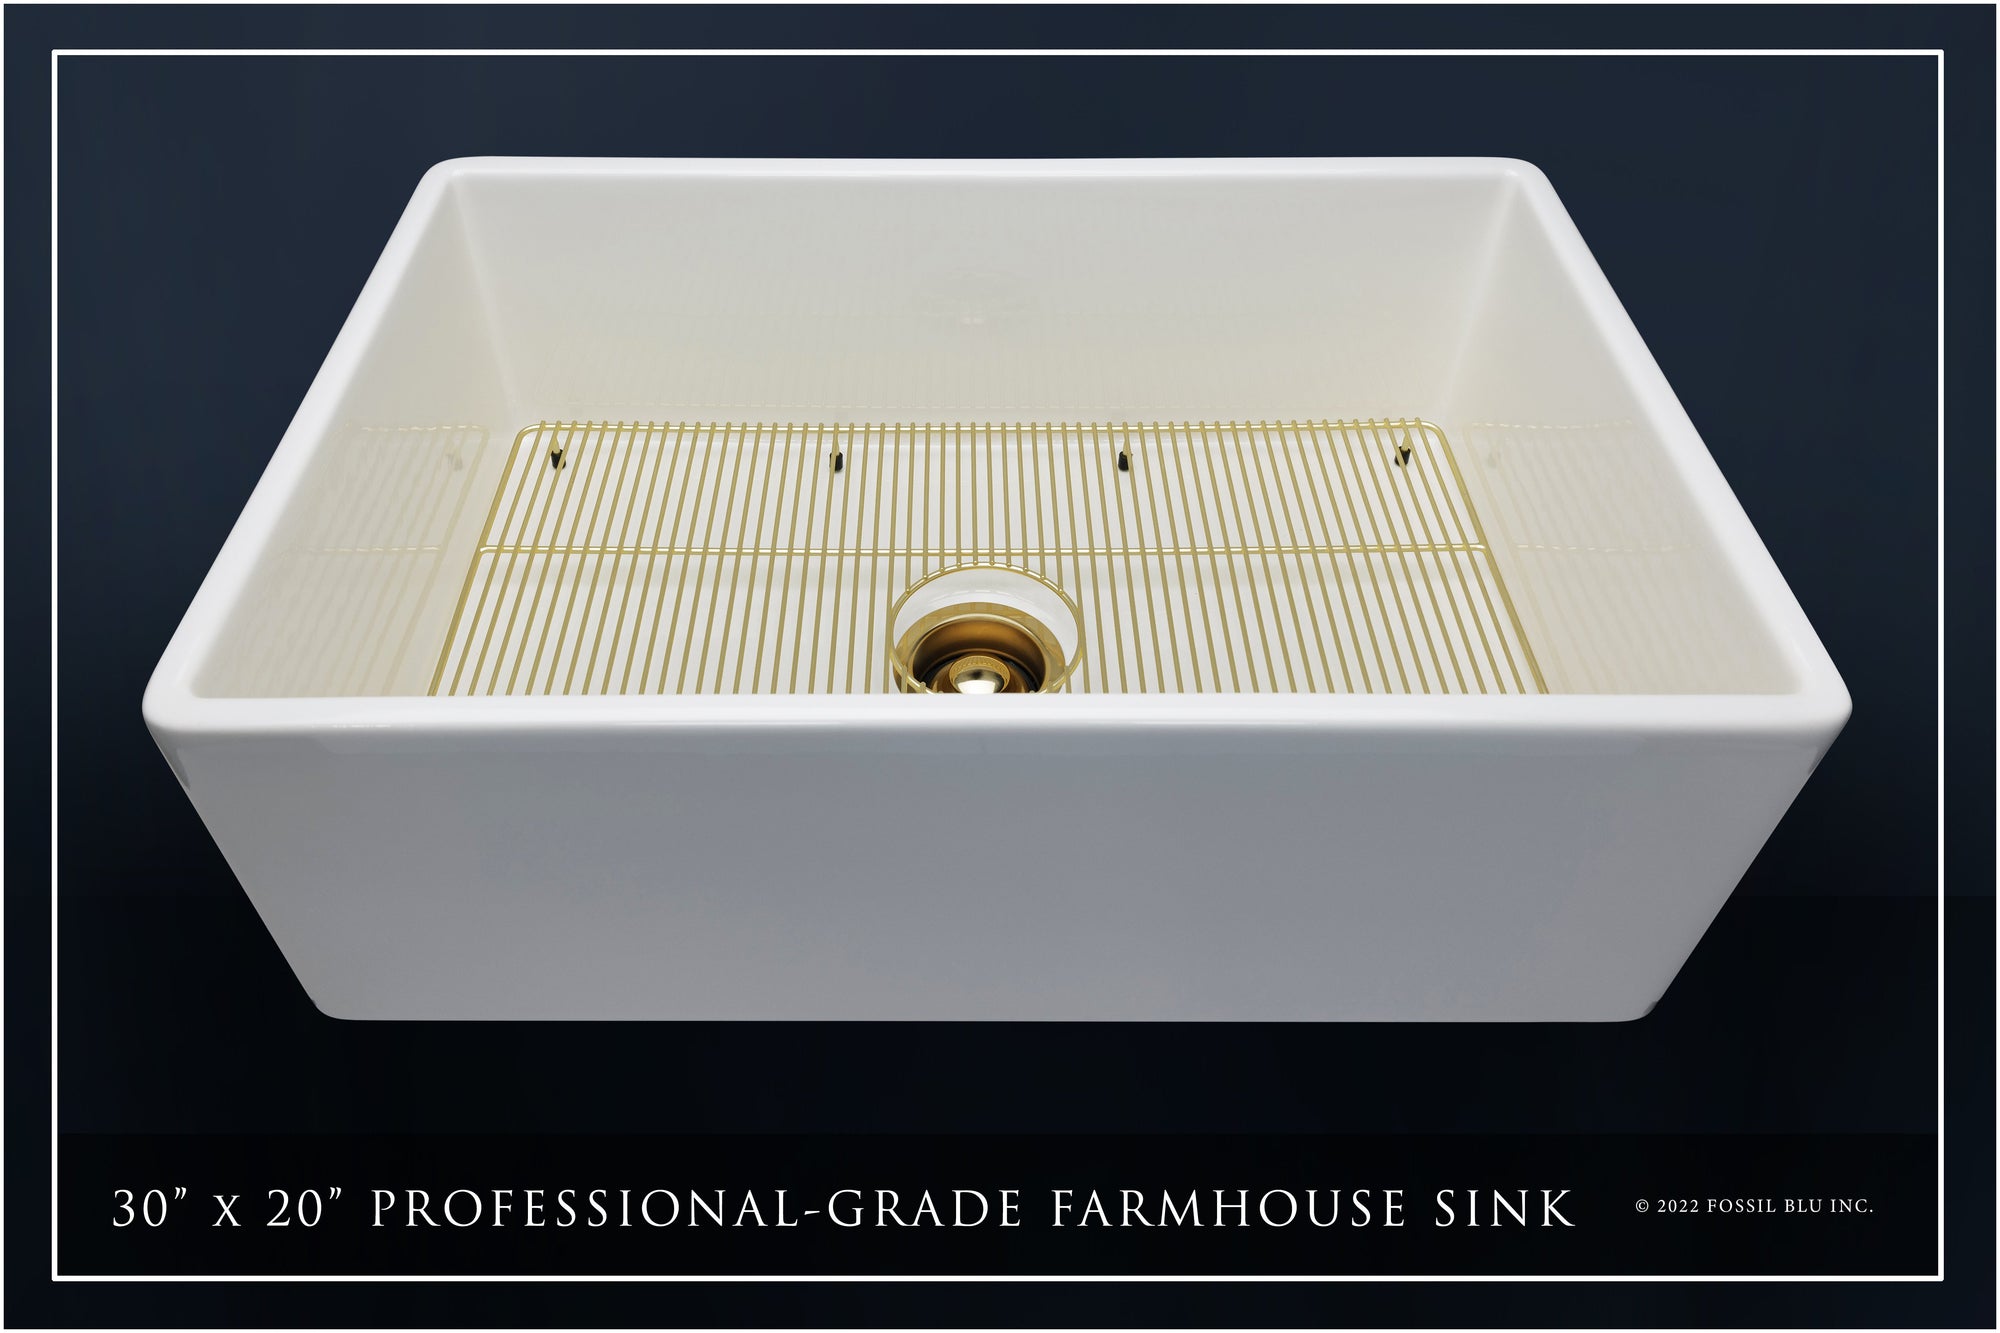 FSW1001BB LUXURY 30-INCH SOLID FIRECLAY FARMHOUSE SINK IN WHITE, MATTE GOLD ACCS, FLAT FRONT